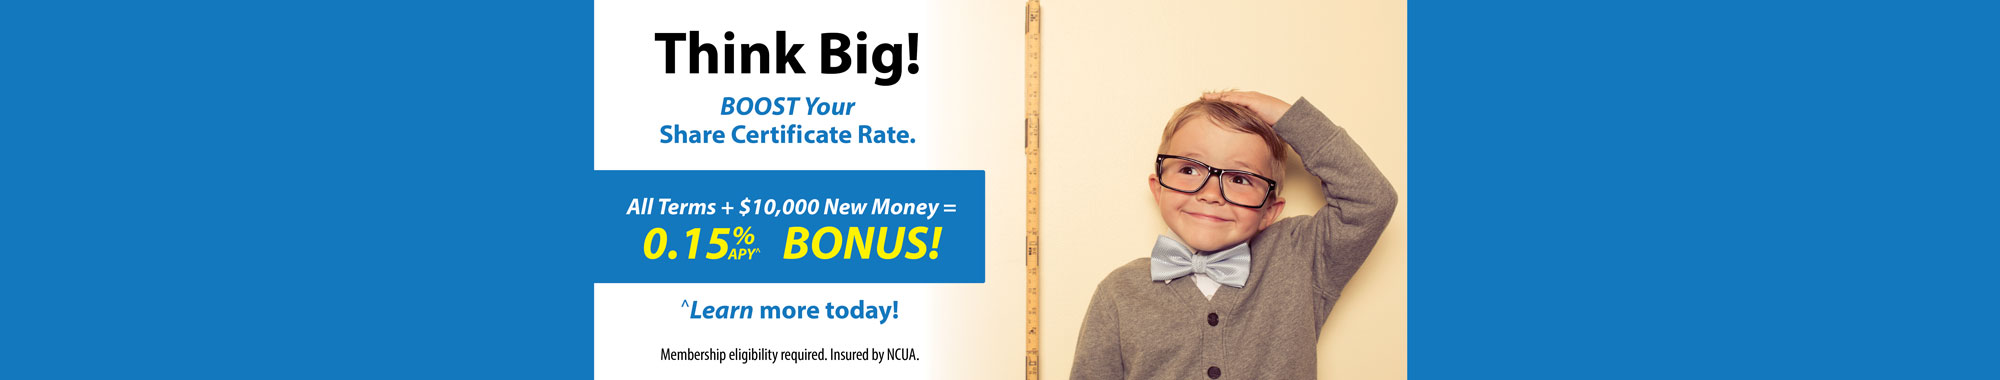 Boy with glasses measuring his height next to a yard stick next to text of share certificate bonus rate offer 